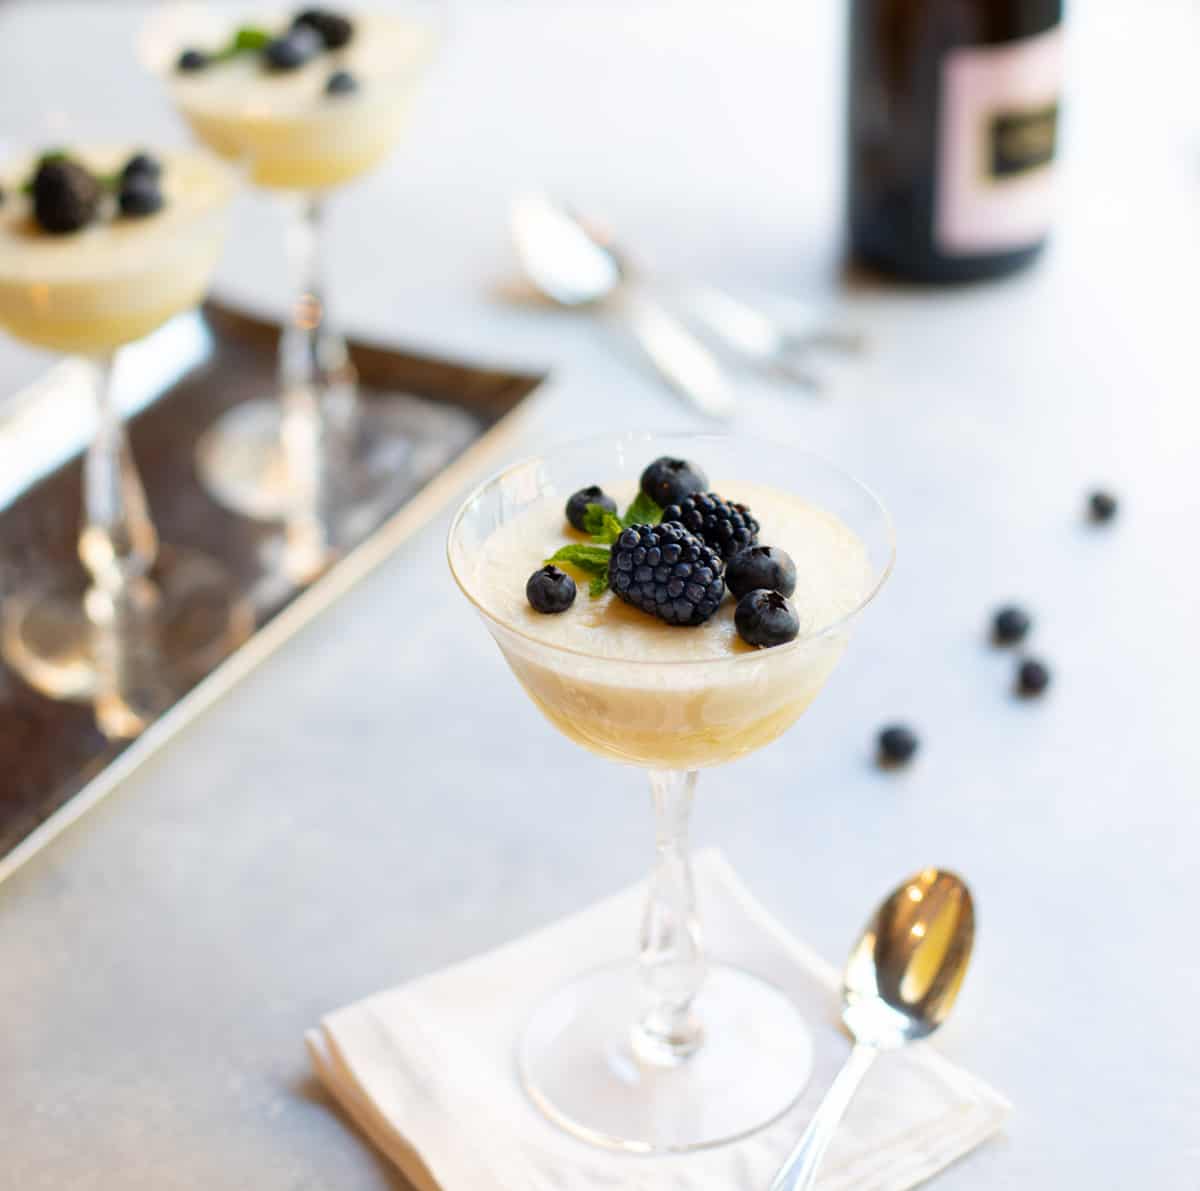 Champagne coupe glasses filled with Chilled Lemon Souffles, topped with blackberries and blueberries